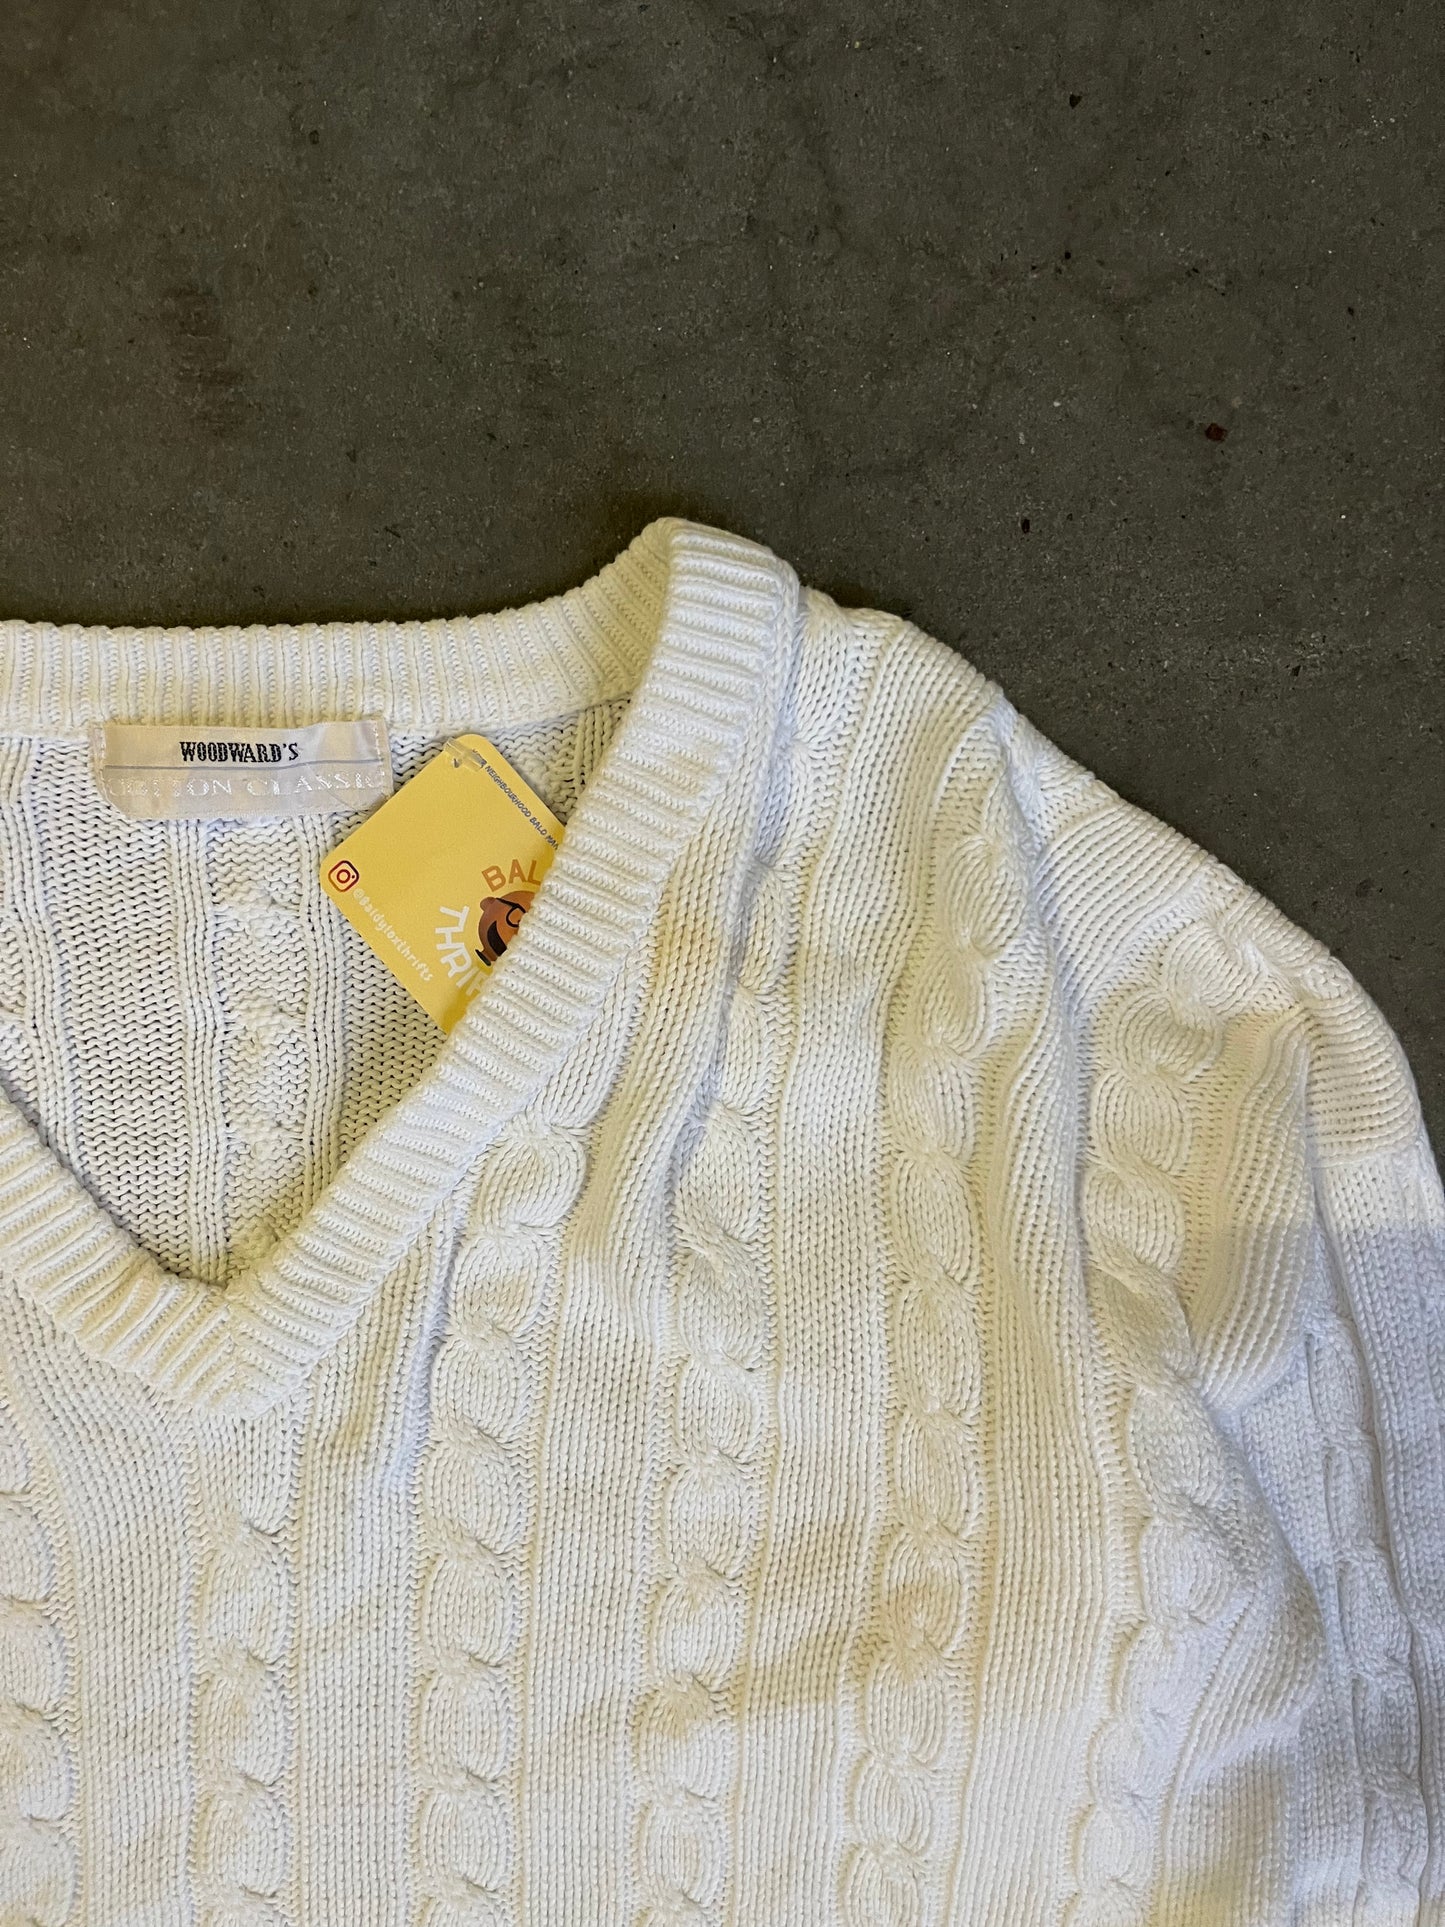 (M) 90s Woodward’s Cableknit wear